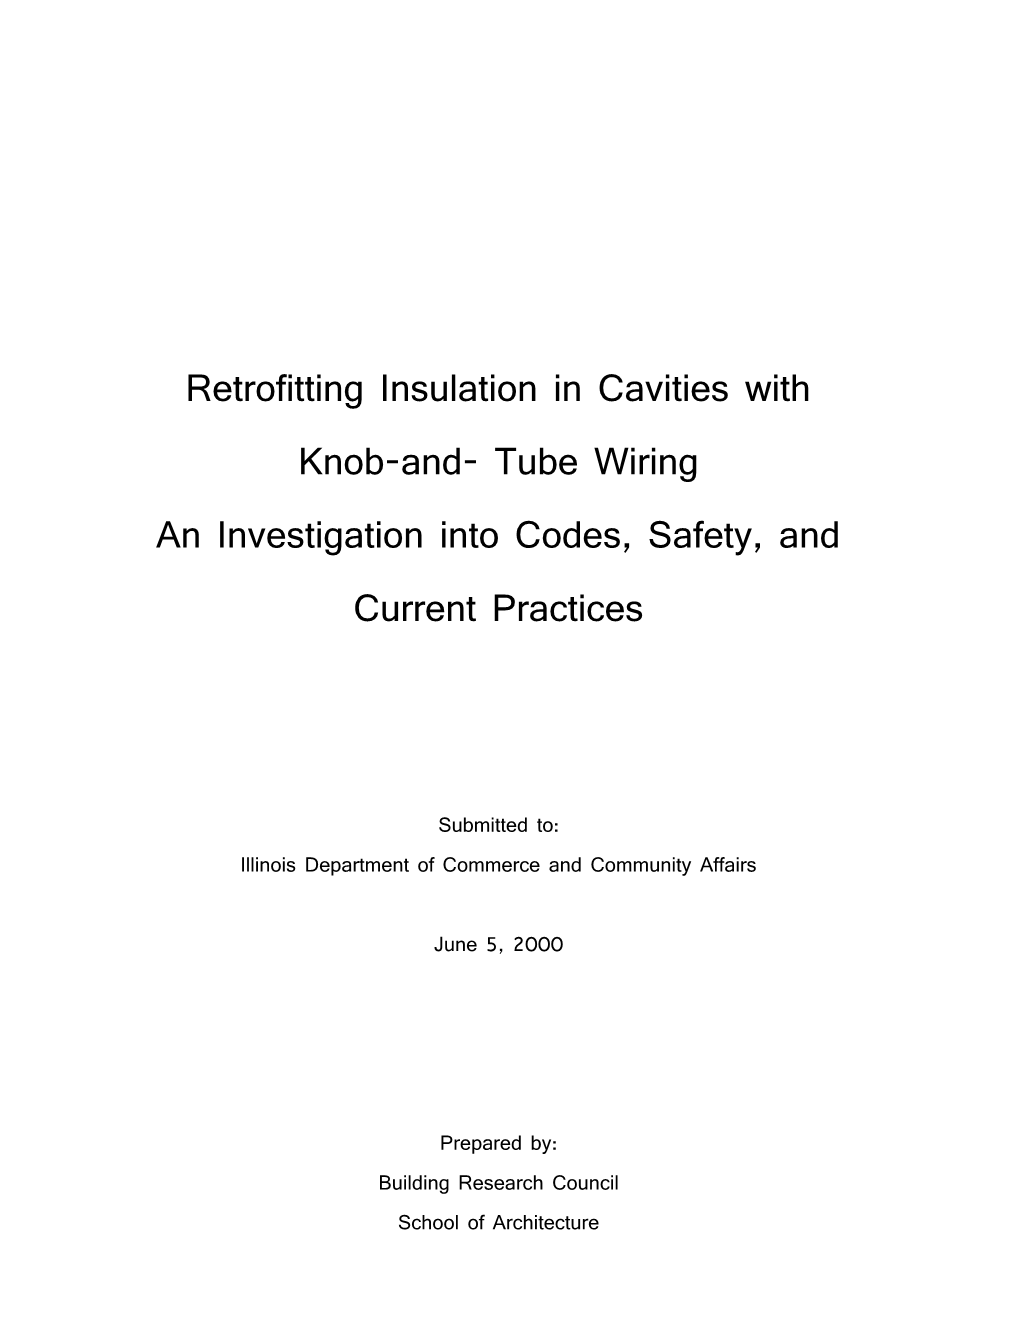 Retrofitting Insulation in Cavities with Knob-And- Tube Wiring